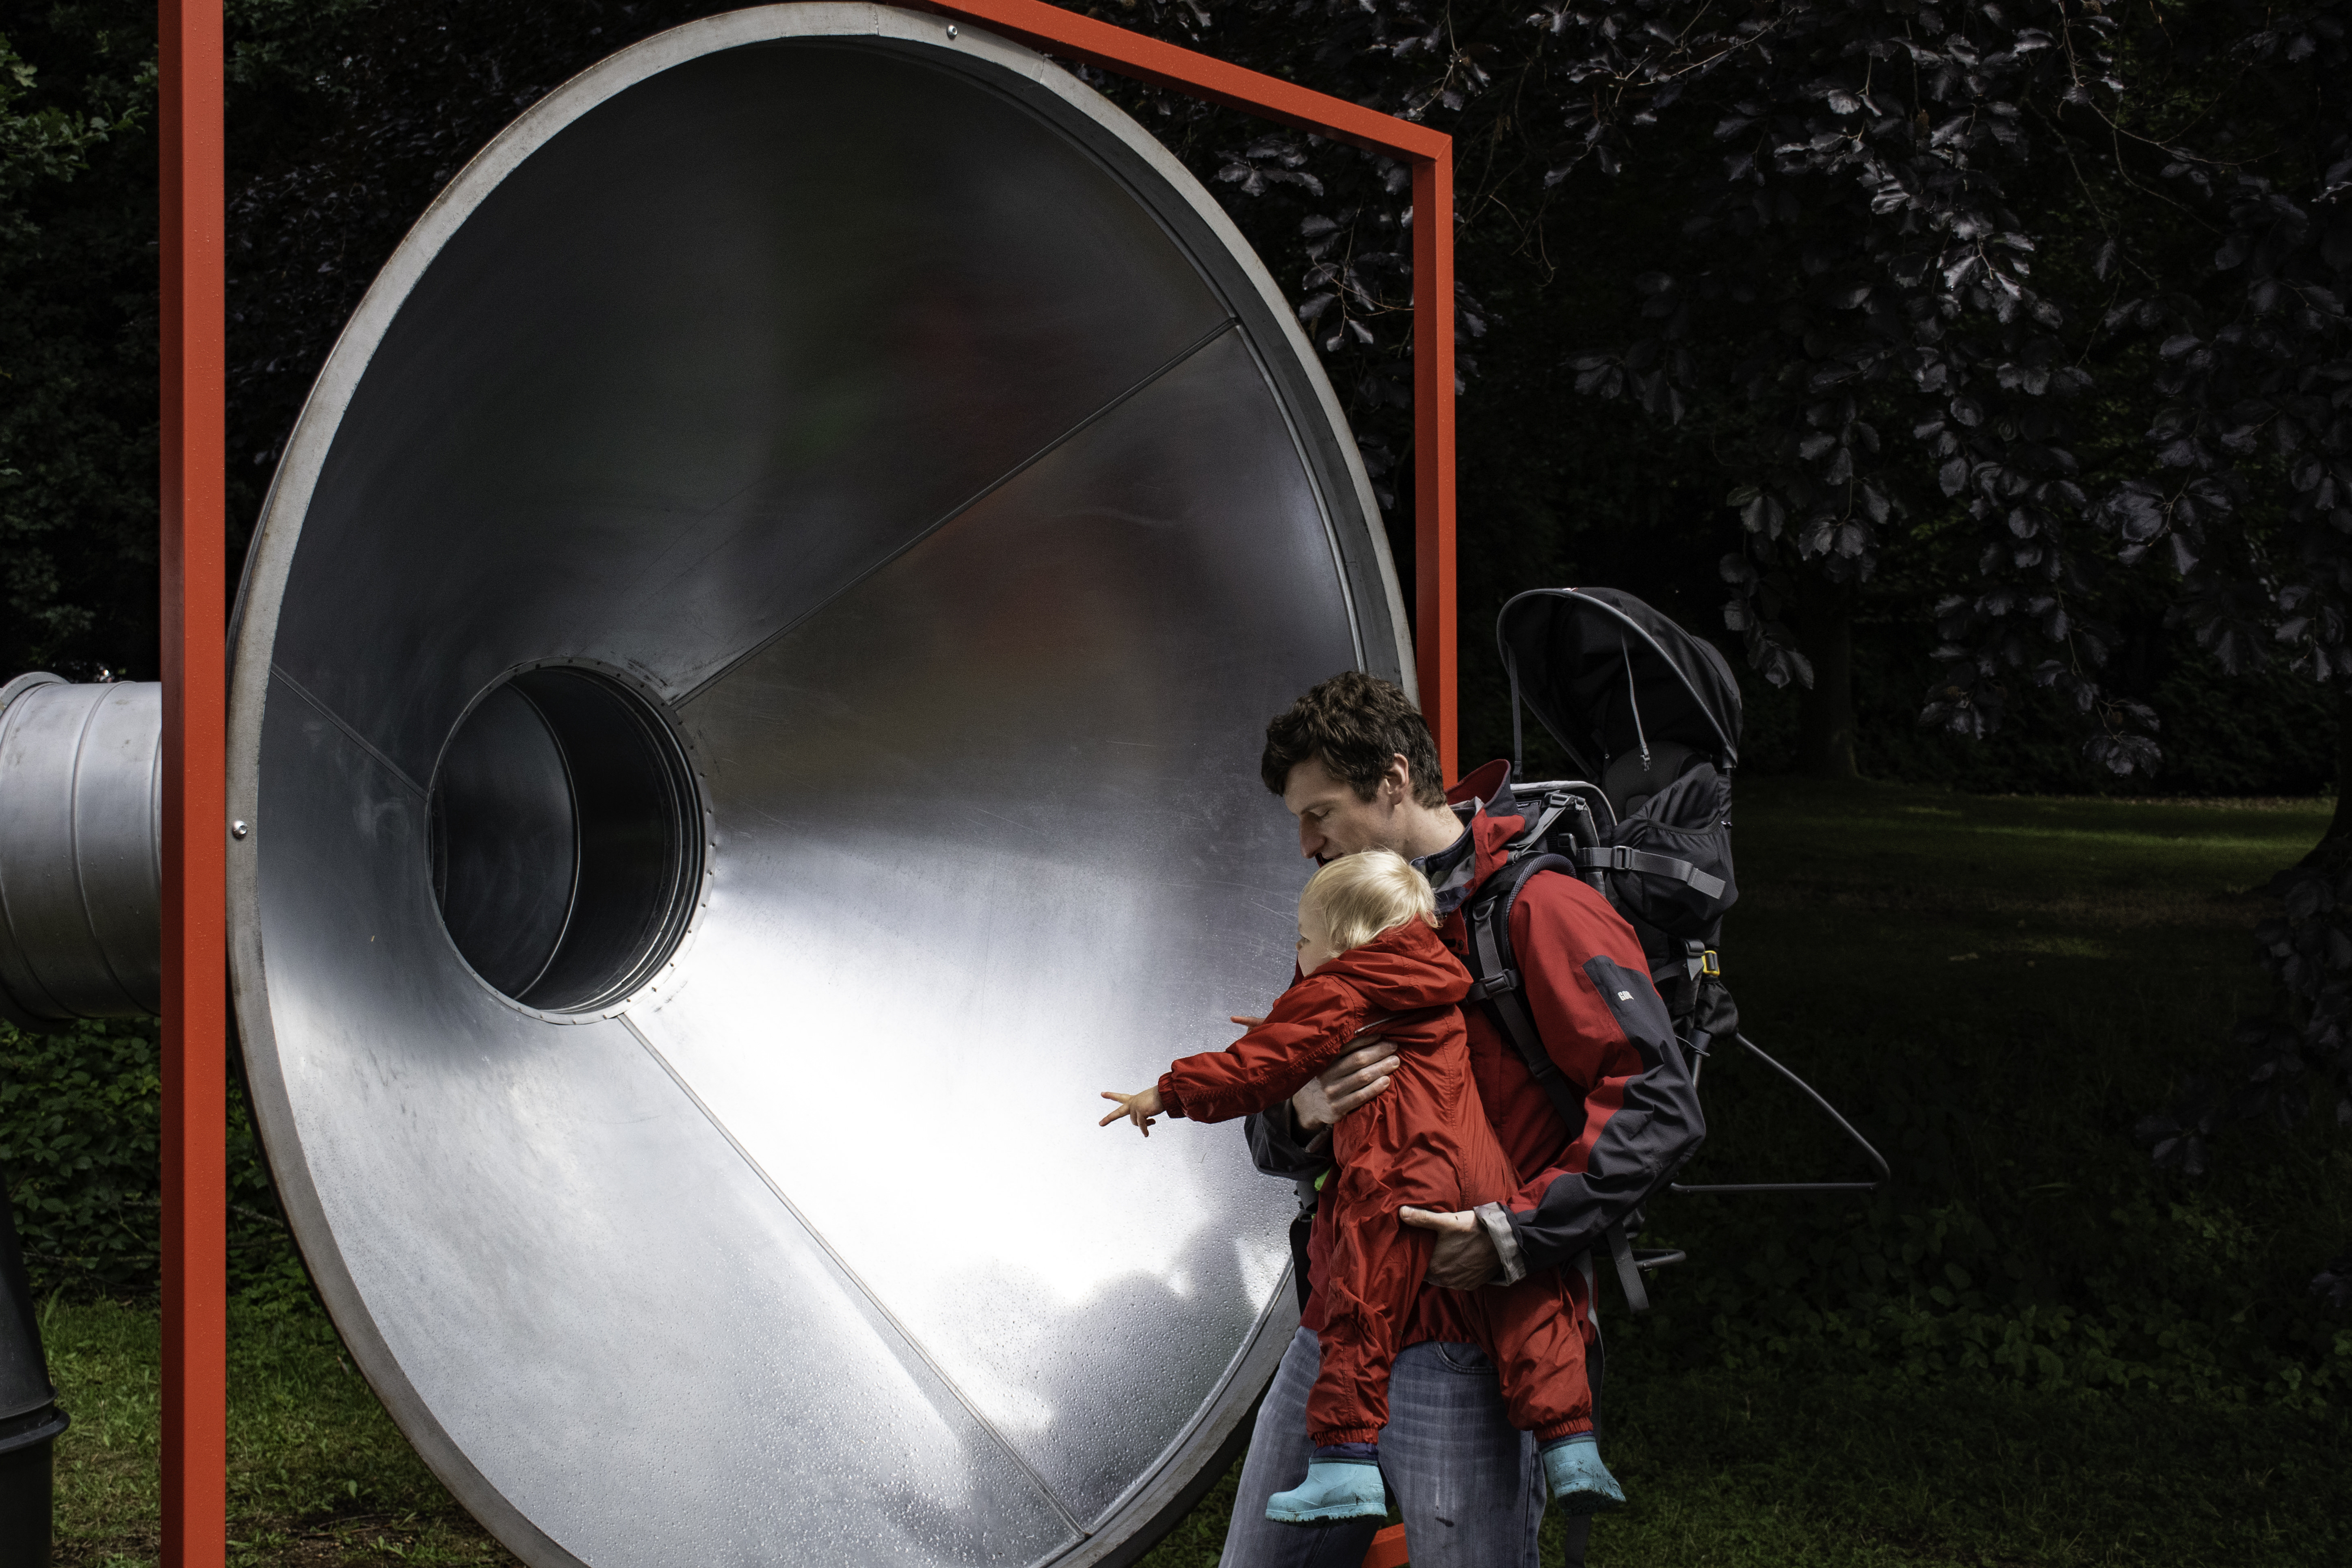 A man and a baby looking into a giant silver tube with a red frame